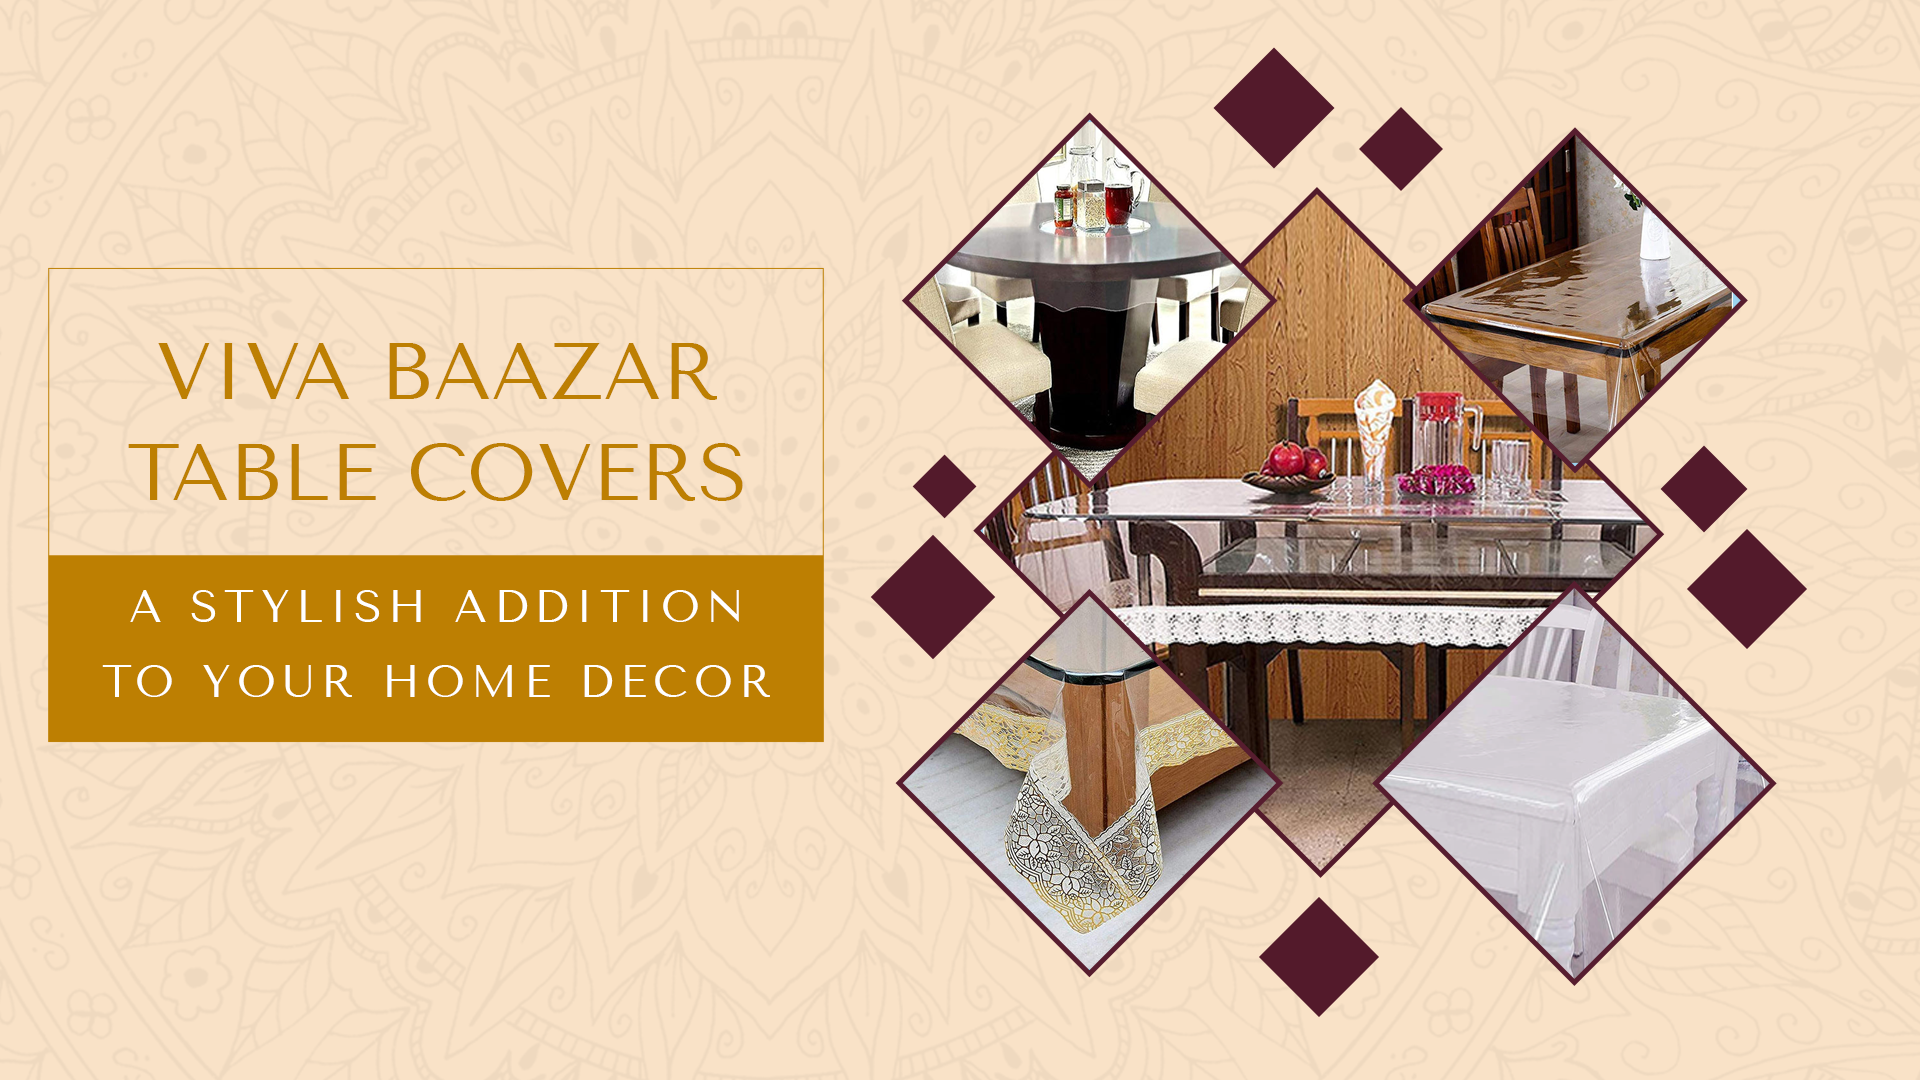 Viva Baazar Table Covers: A Stylish Addition to Your Home Decor